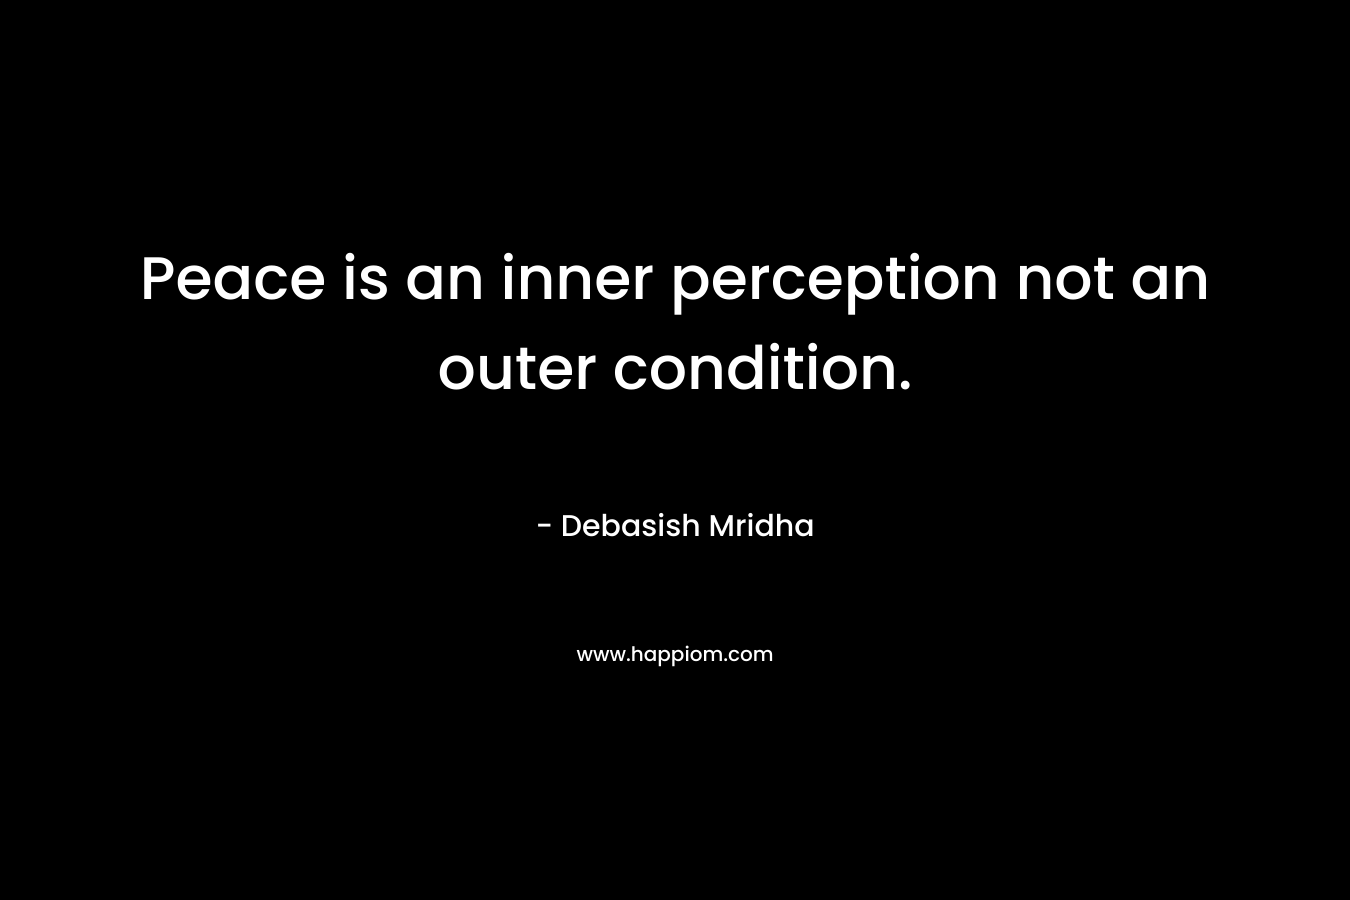 Peace is an inner perception not an outer condition.